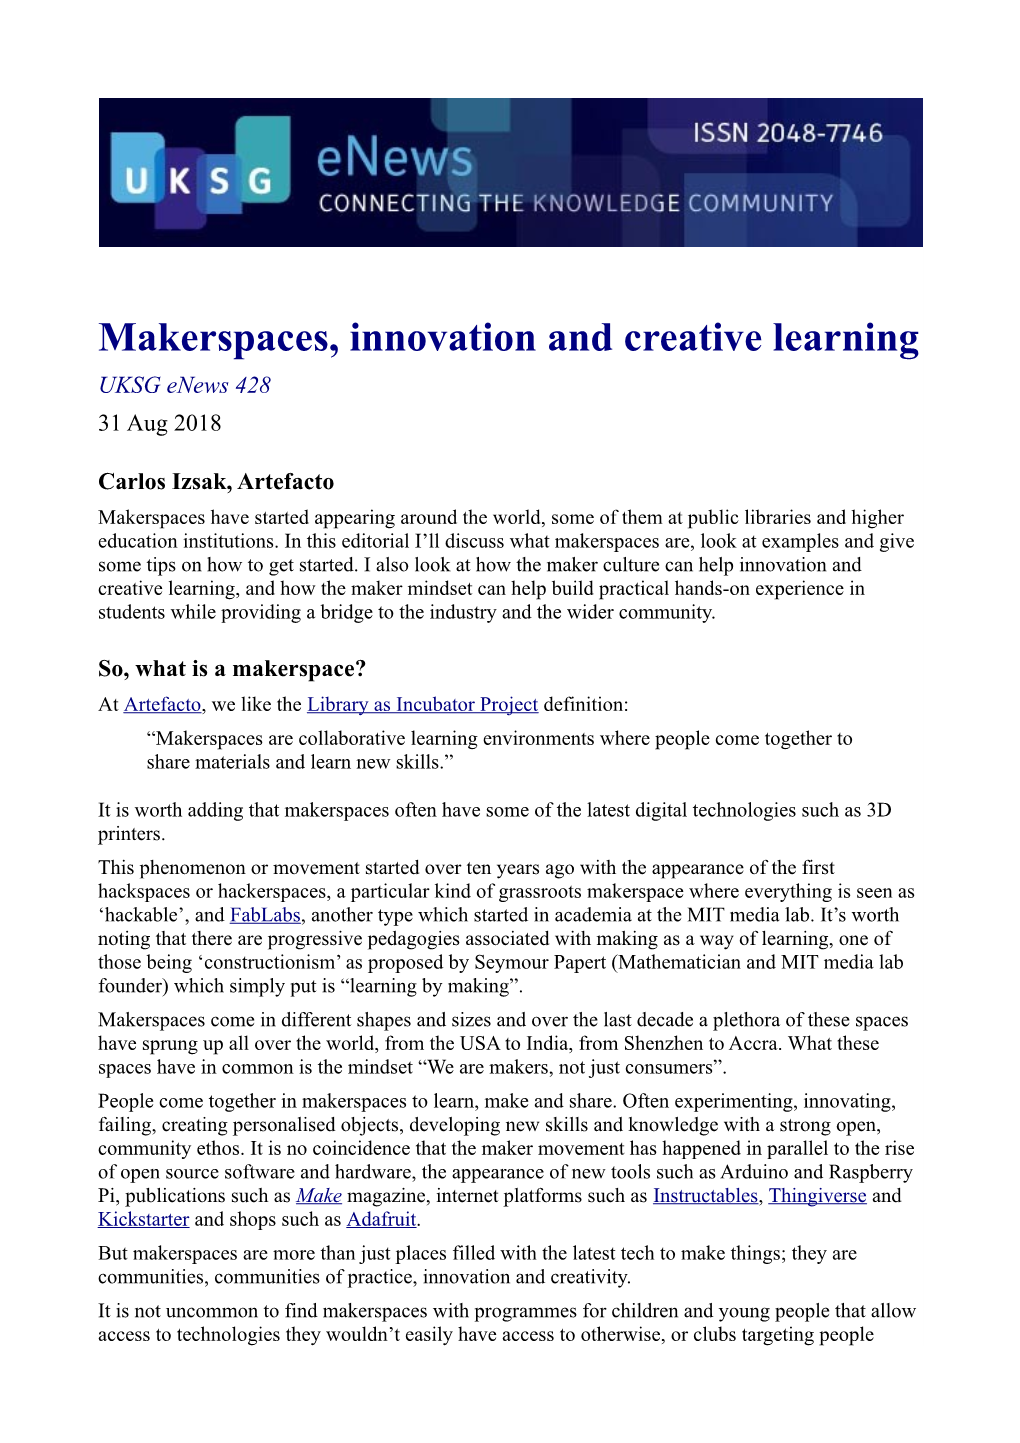 Makerspaces, Innovation and Creative Learning UKSG Enews 428 31 Aug 2018